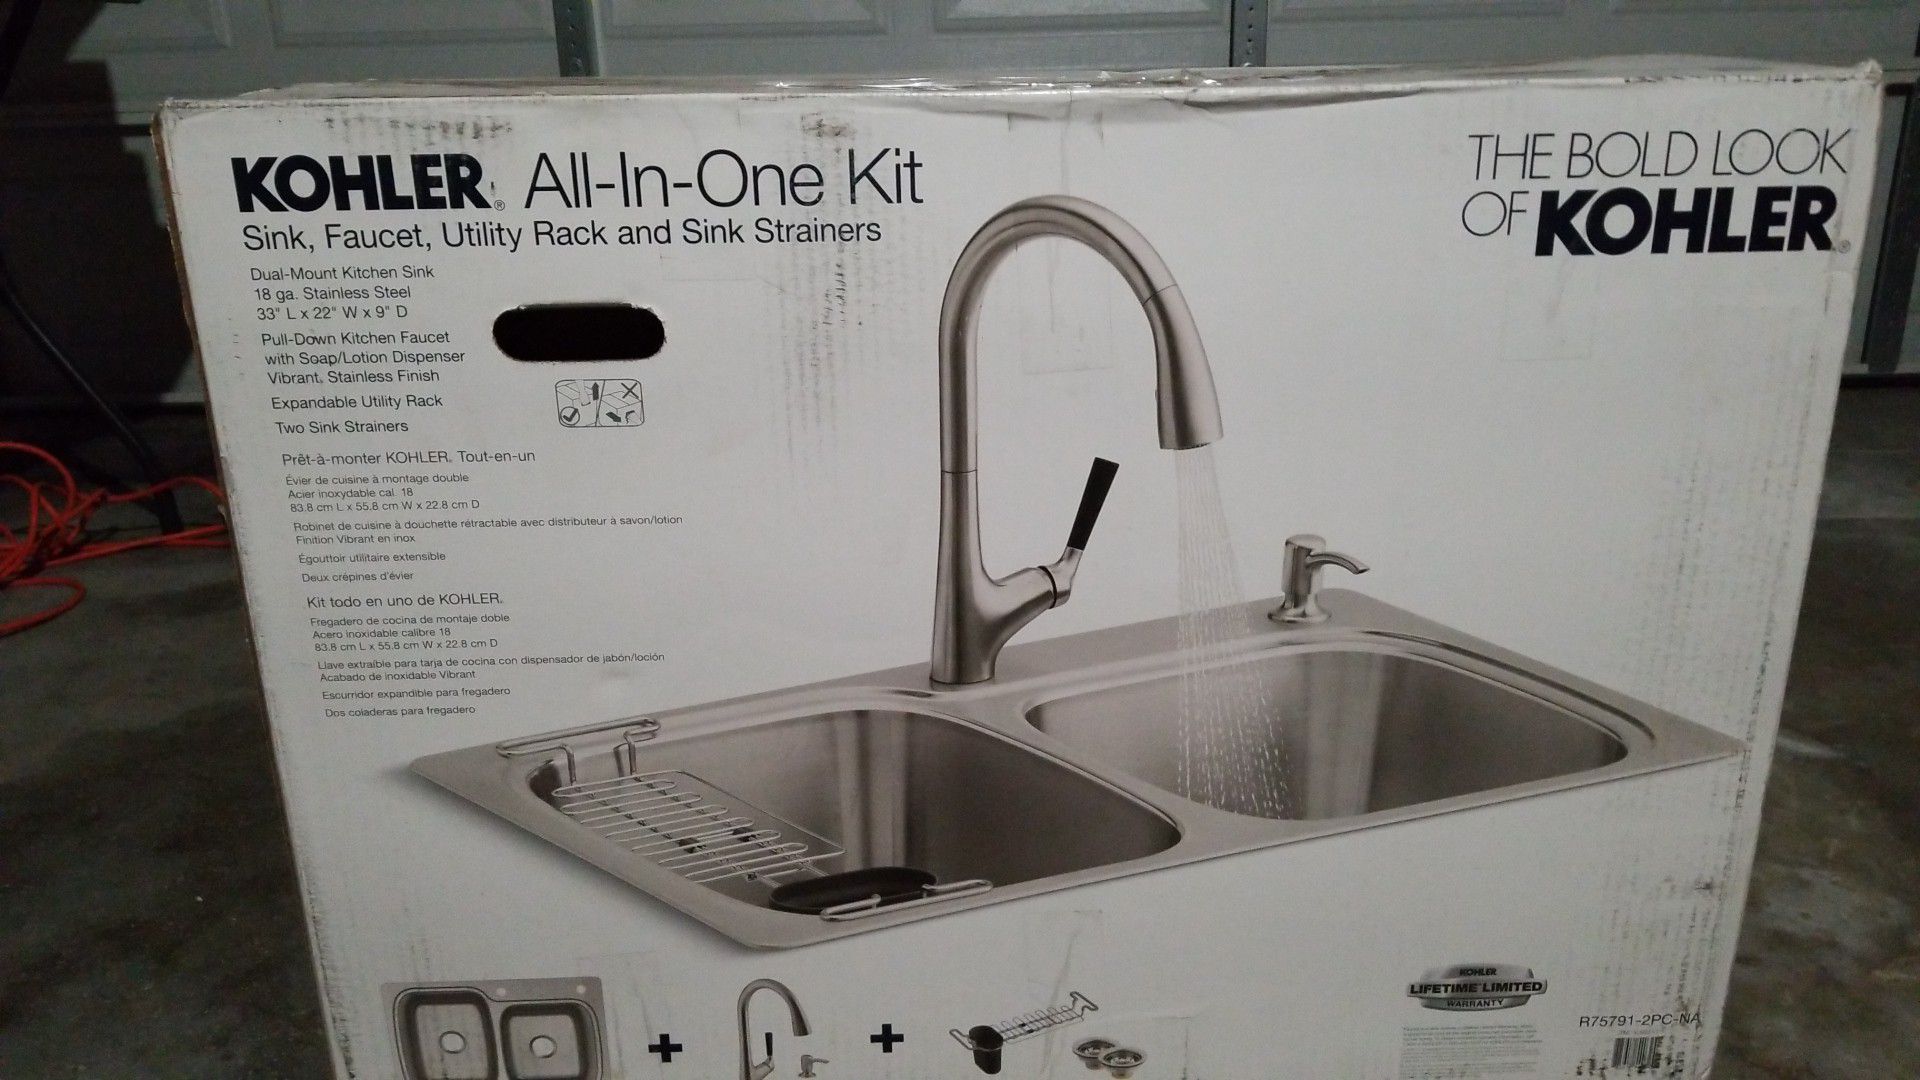 Kohler all in one kit sink, faucet, utility rack and sink strainer